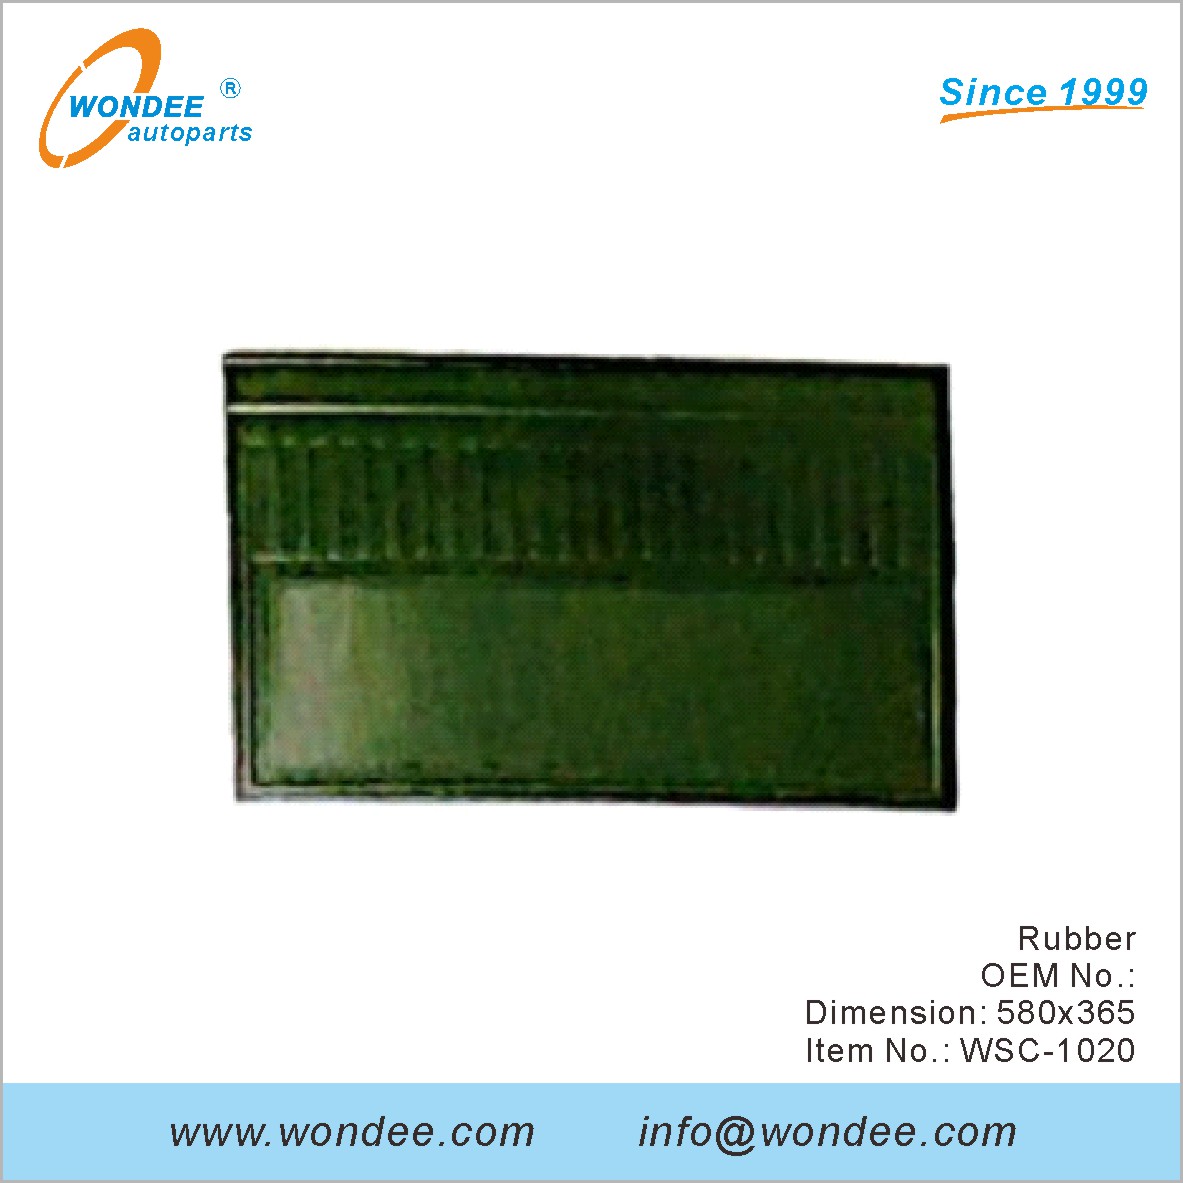 Rubber OEM from WONDEE